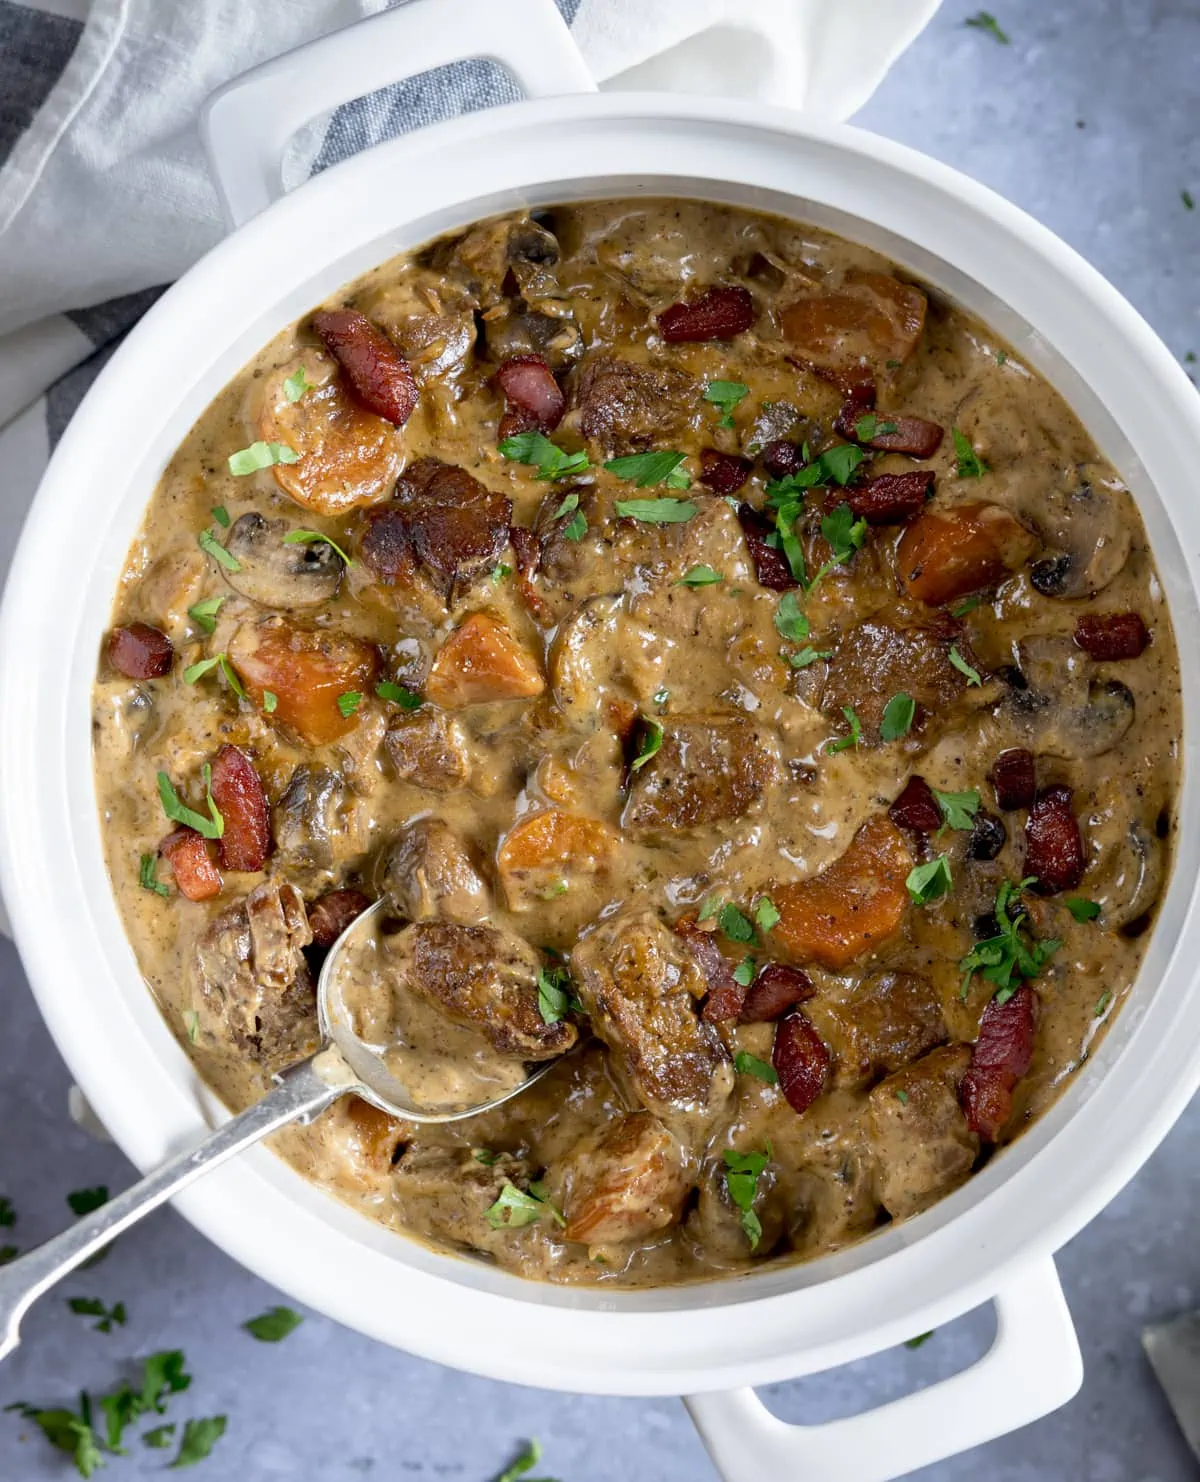 23 Best Slow Cooker Casserole Recipes - Insanely Good